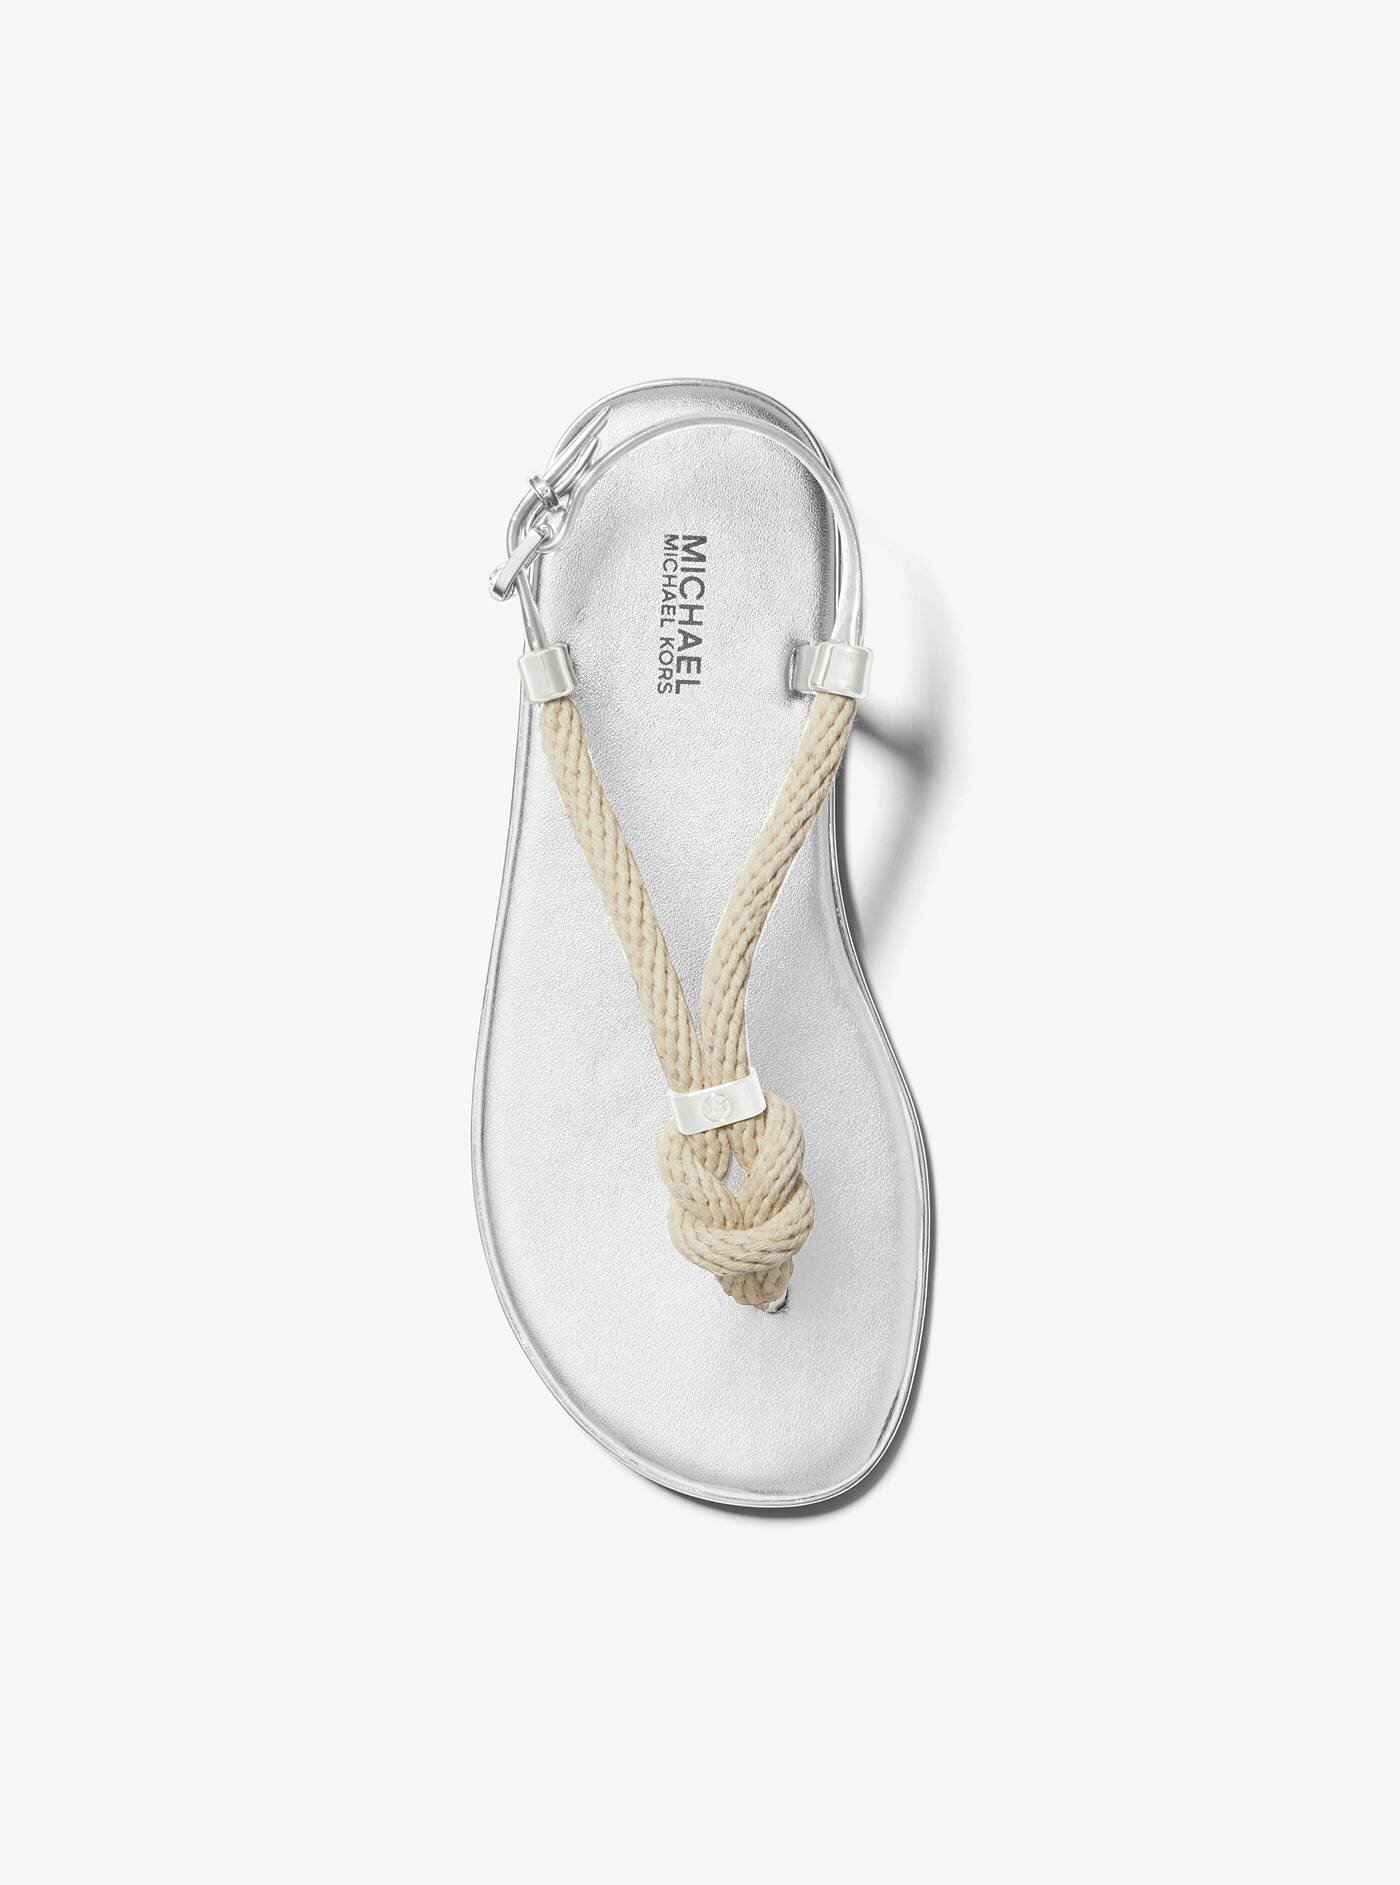 michael kors holly rope sandals